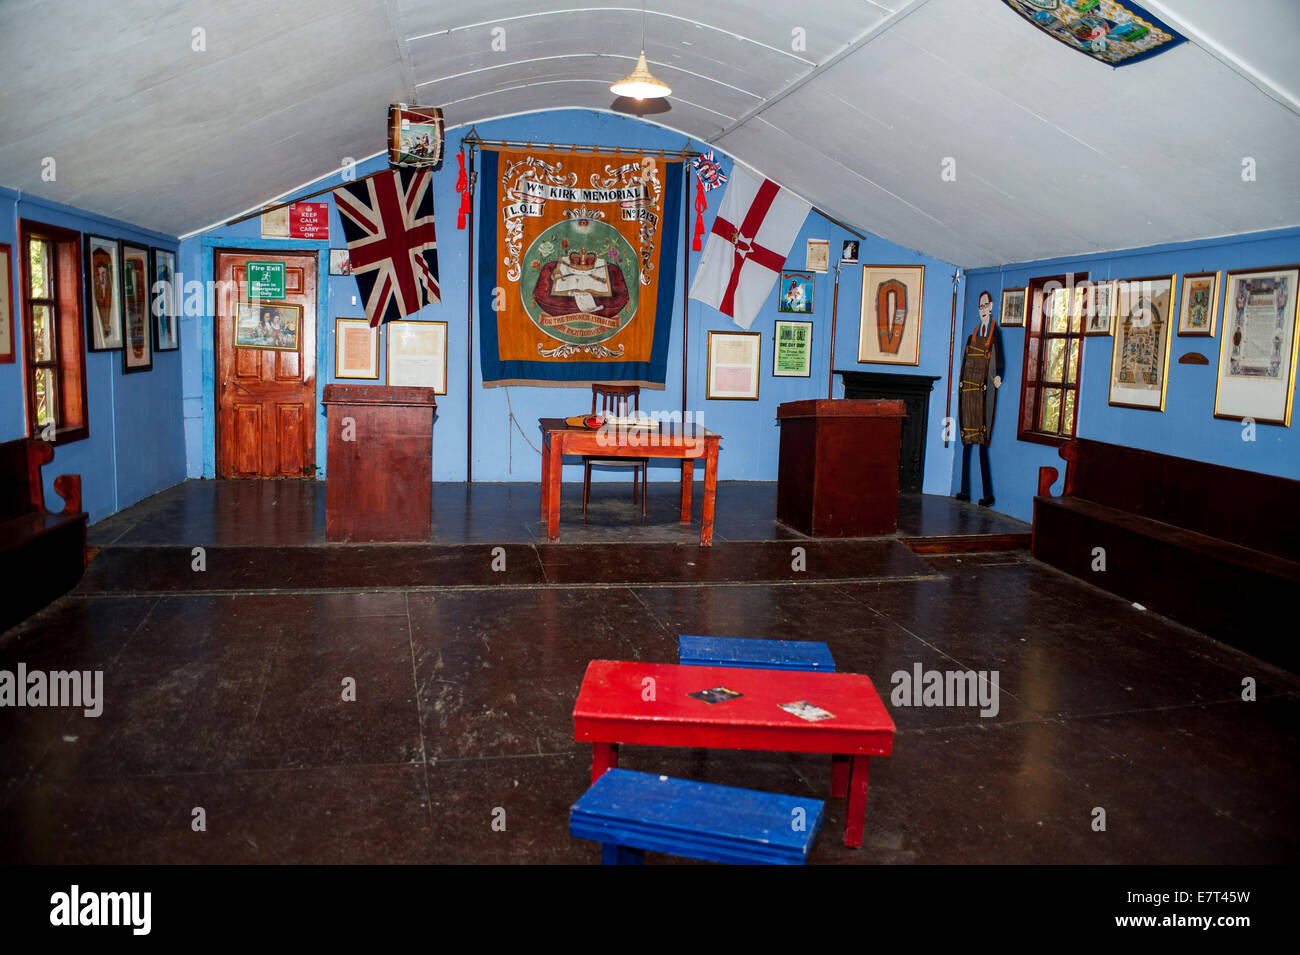 Reconstruction of 19th century Orange Lodge meeting hall at the Famine Village, Isle of Doagh, County Donegal, Ireland Stock Photo